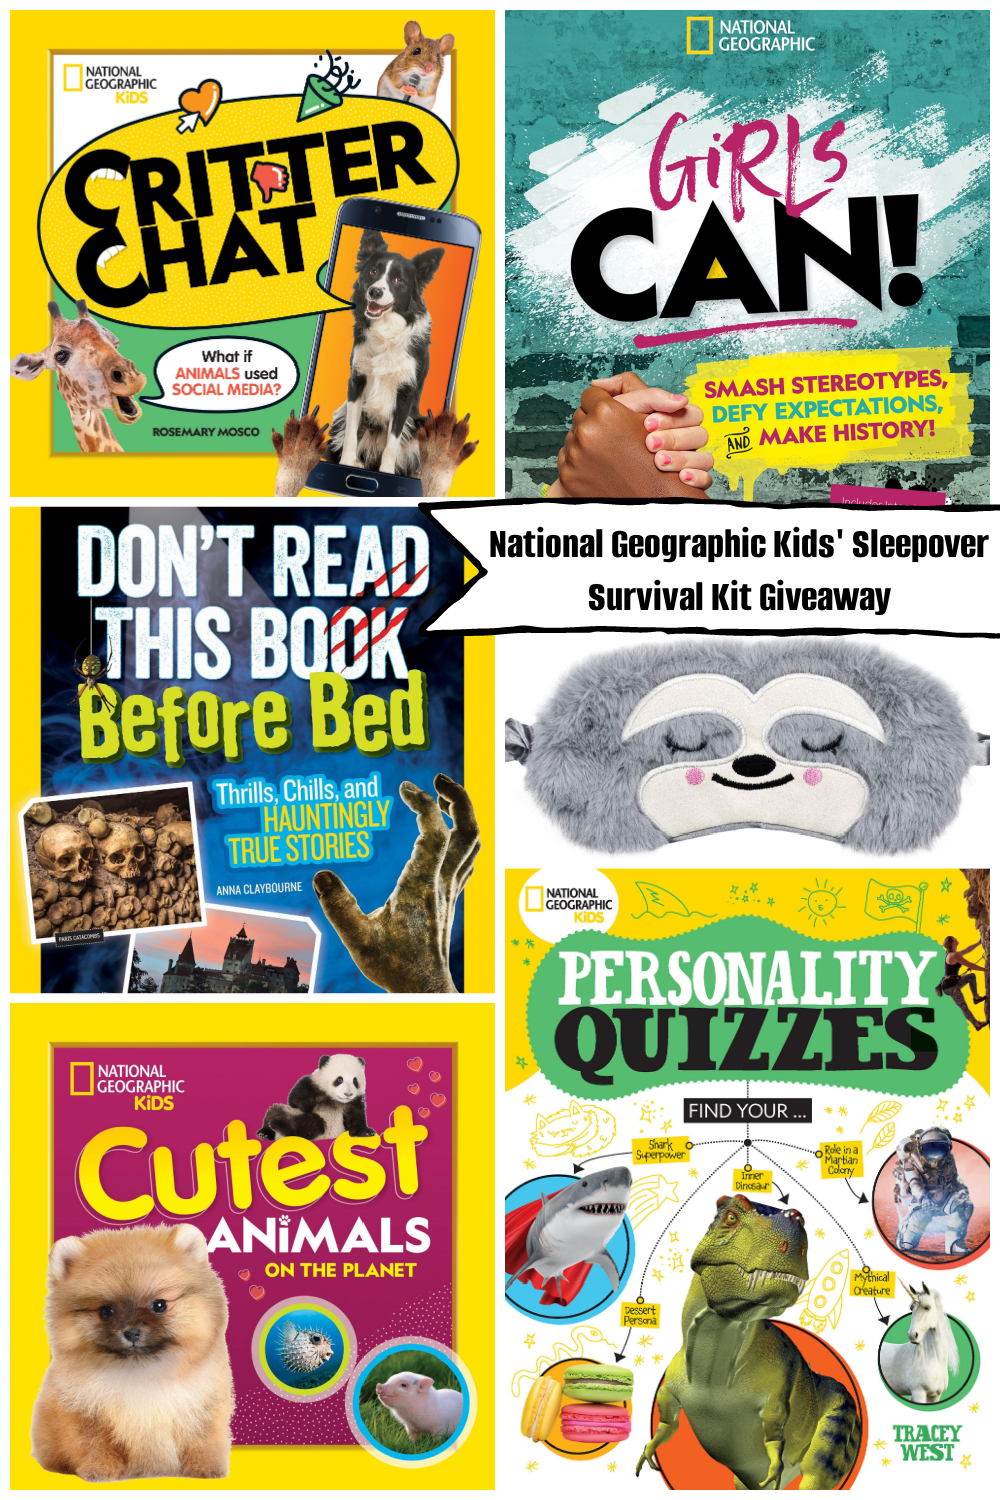 National Geographic Kids' Sleepover Survival Kit Giveaway